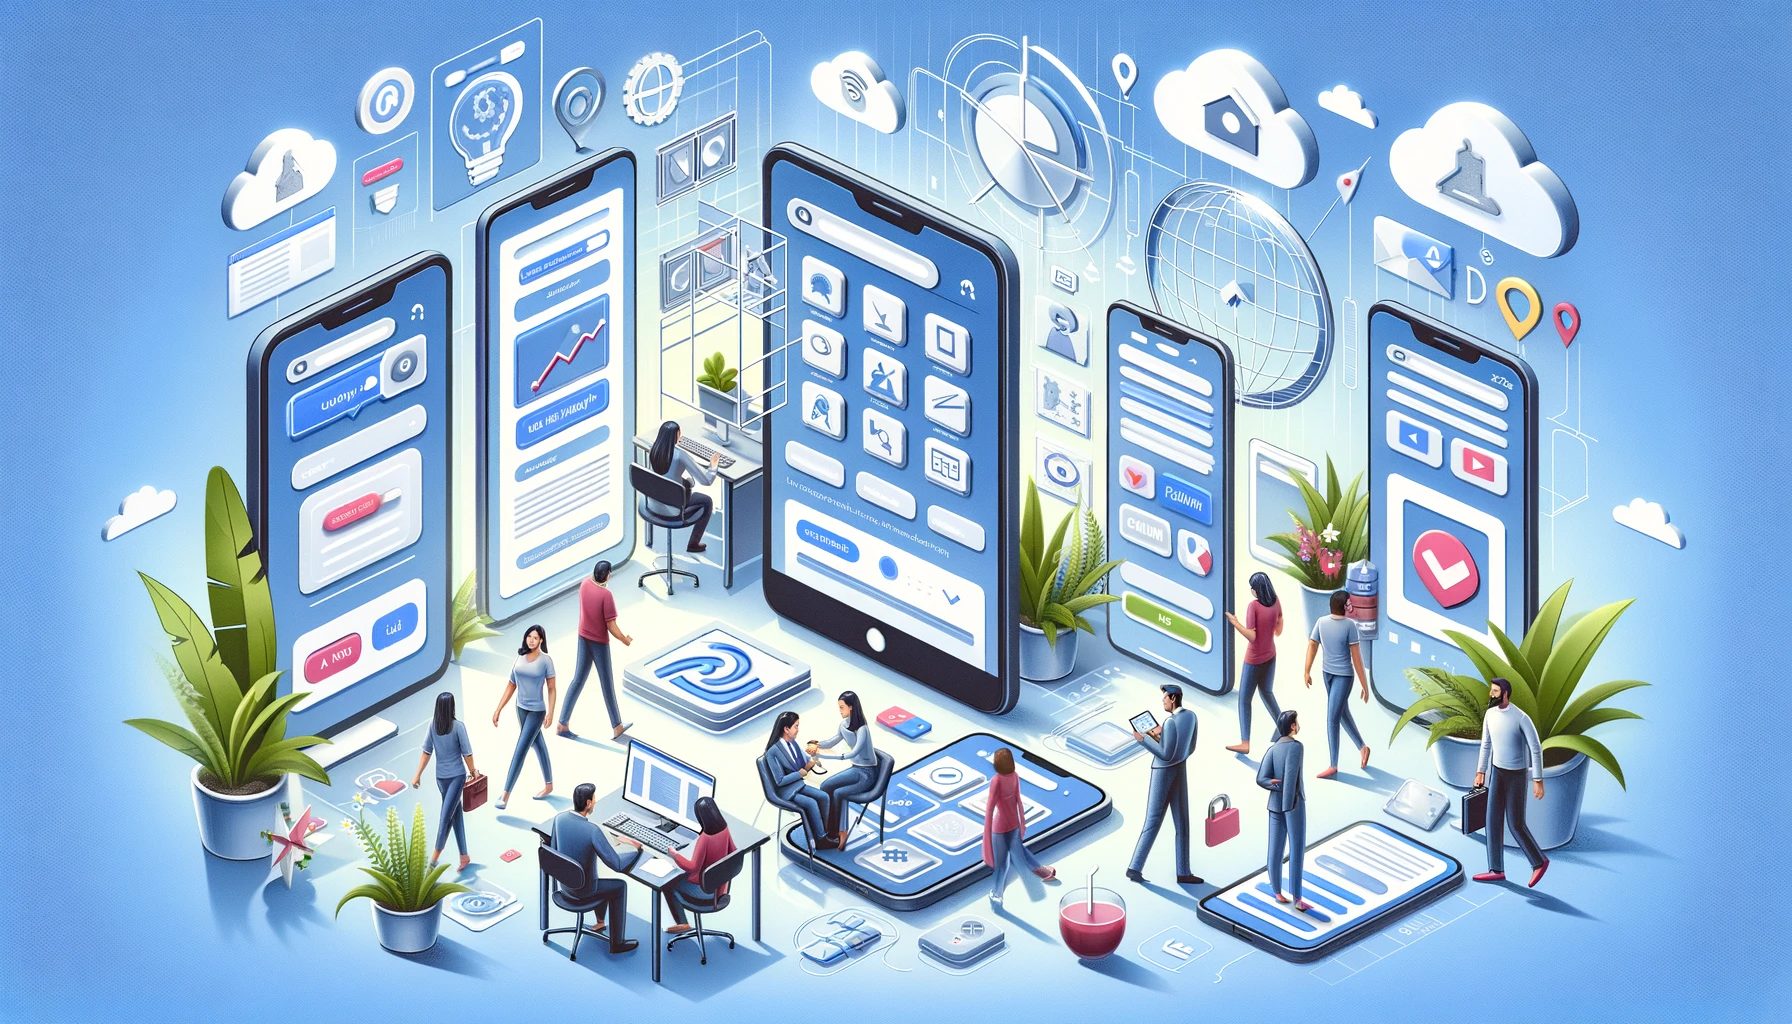 Image depicting the concept of optimizing website usability, featuring diverse individuals engaging with user-friendly interfaces across various devices, highlighting clear navigation and responsive design